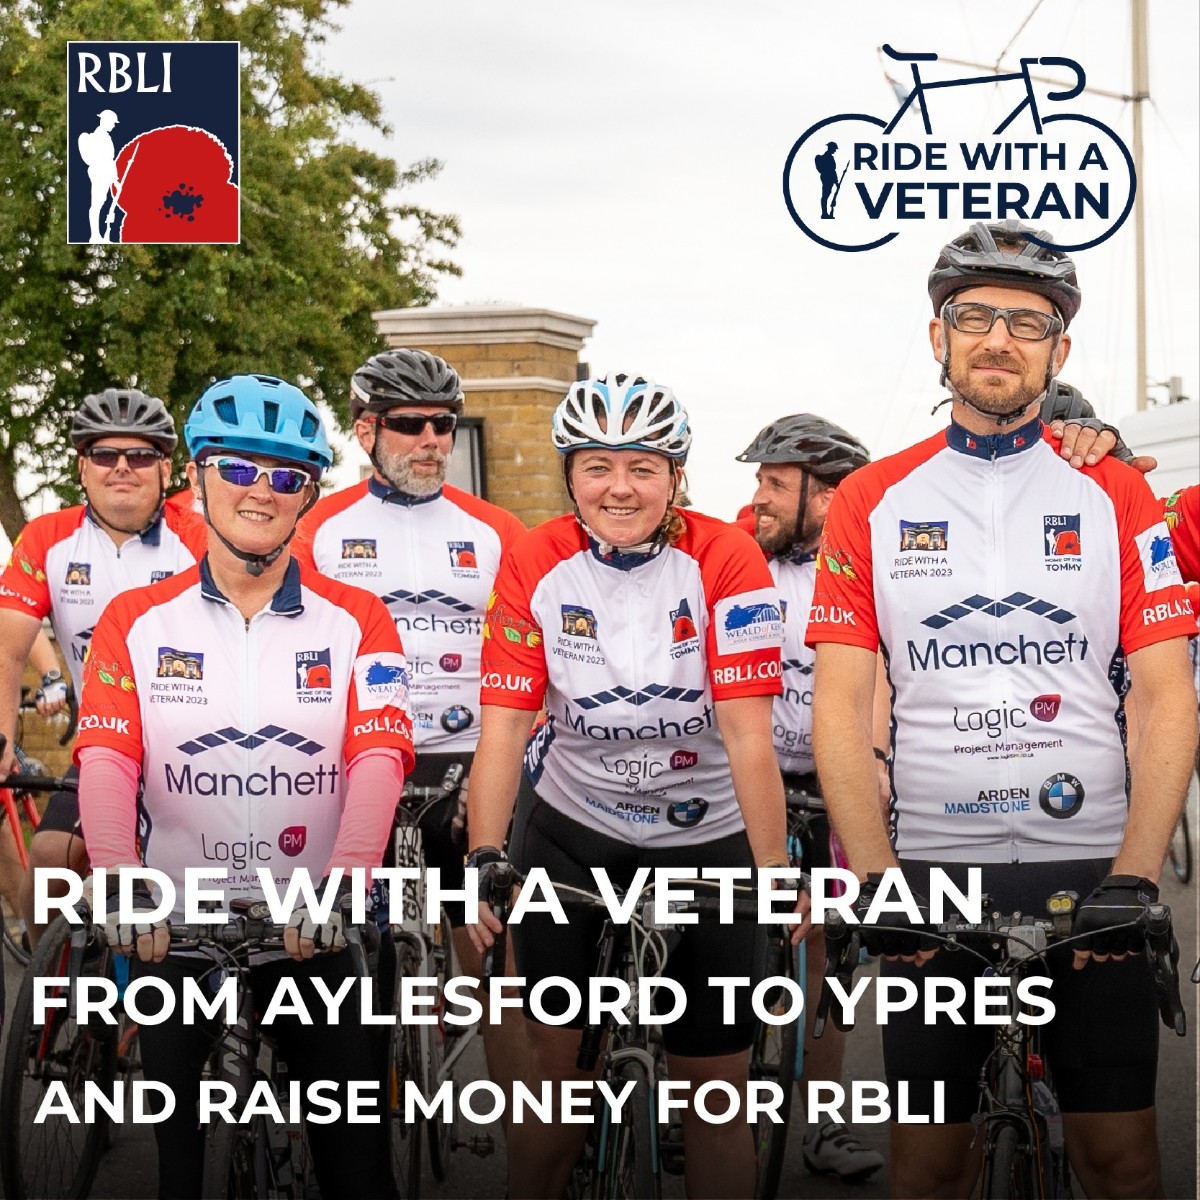 Between the 28th-30th June, you could be cycling from Aylesford to the Menin Gate memorial in Ypres, in support of veterans! 🚲 Today is thr last day to sign up so don't miss out on on this amazing adventure alongside some of our nation’s veterans: brnw.ch/21wJcKi